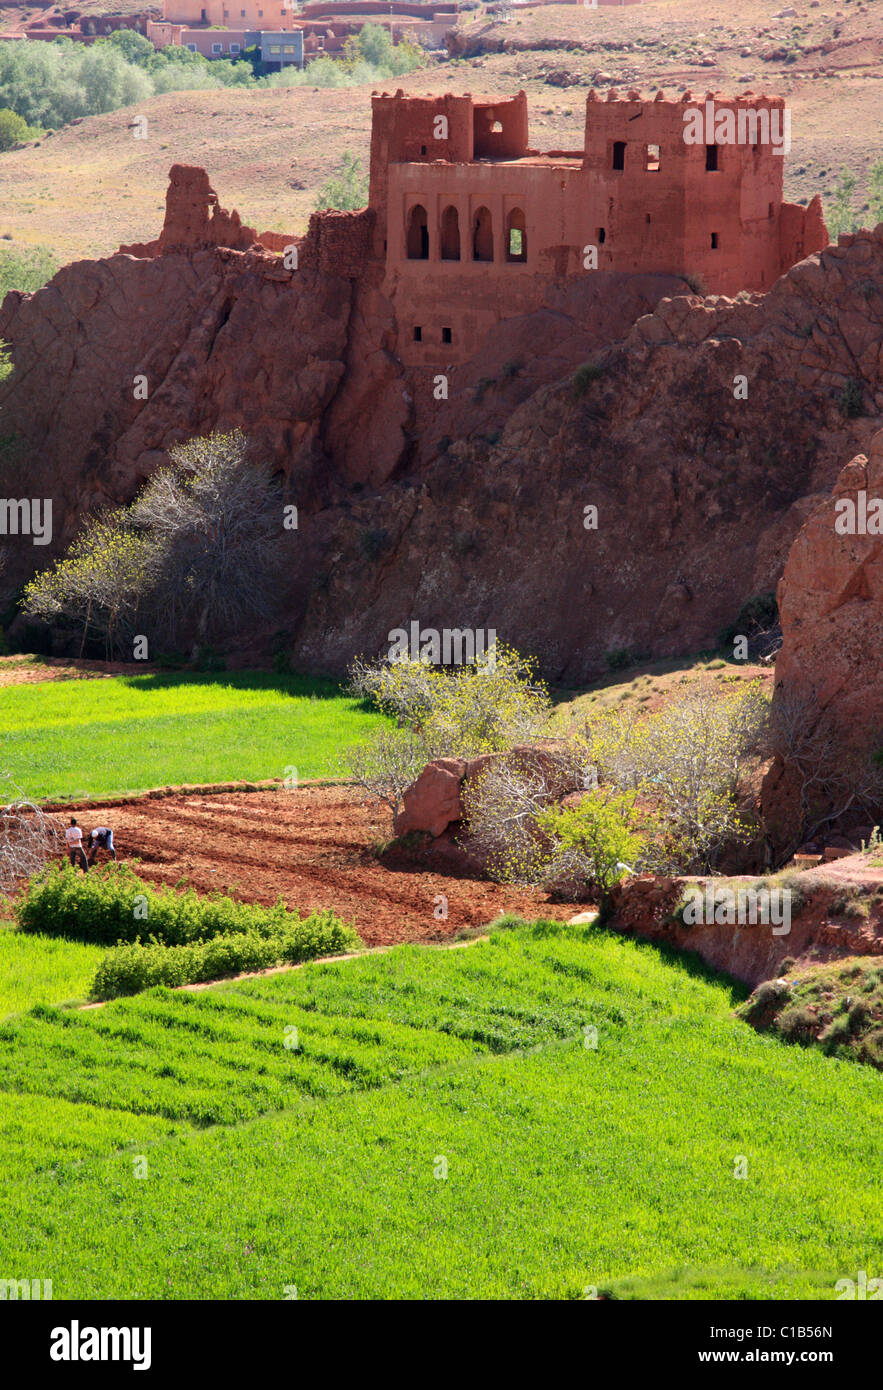 Kasbah in the Dades gorge, overlooking an irrigated oasis, High Atlas region, southern Morocco. Stock Photo